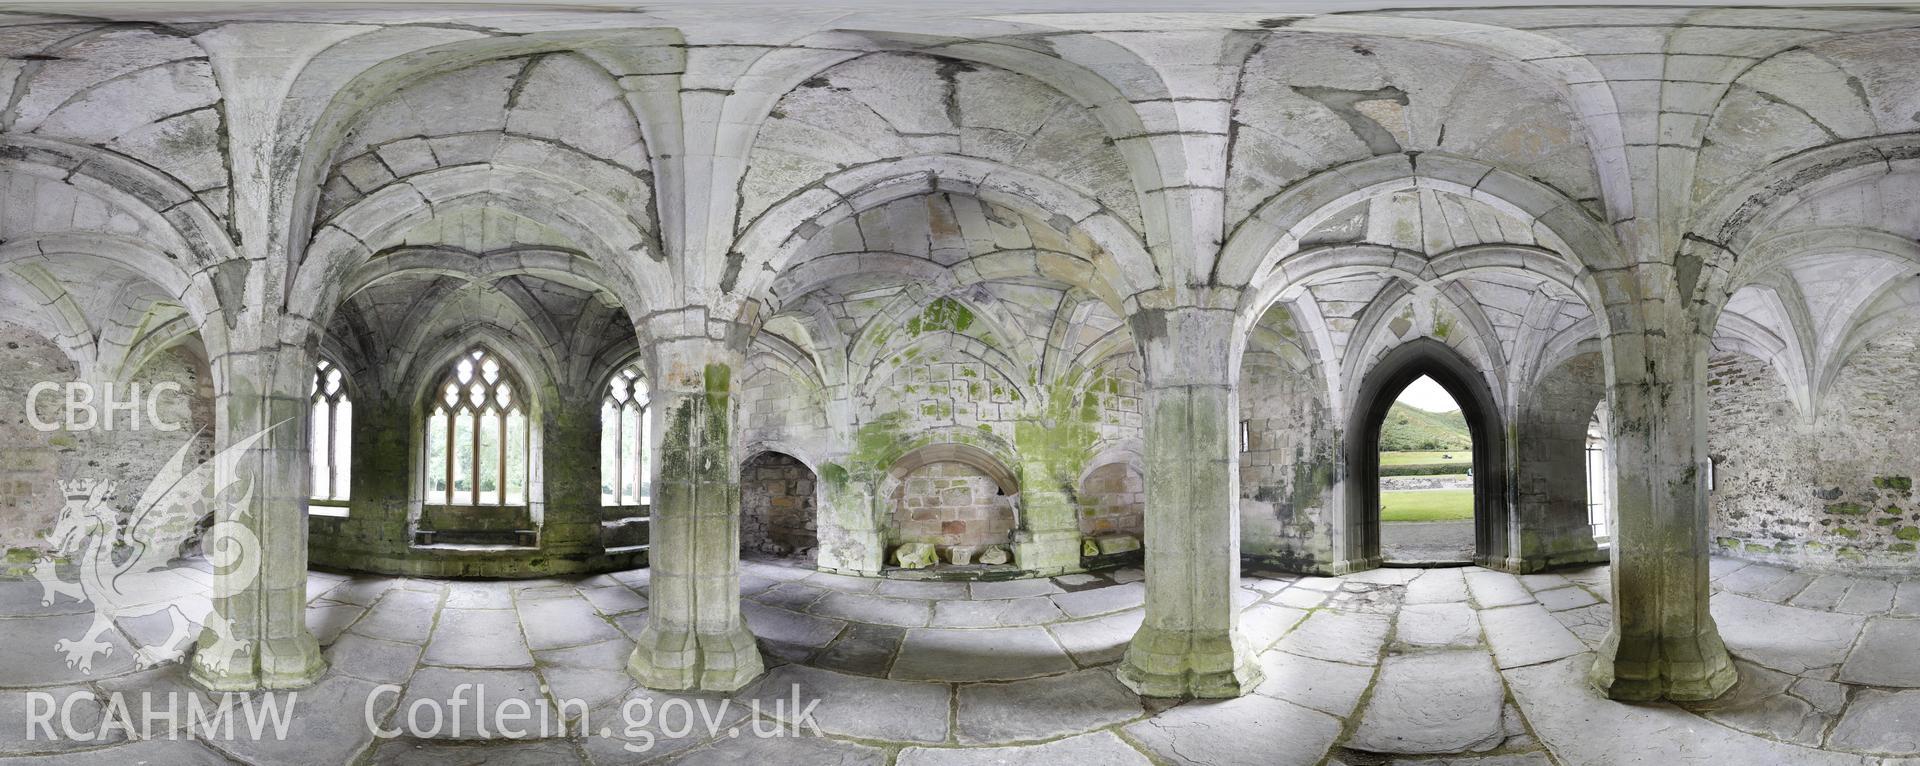 Reduced resolution .tiff file of stitched images in the Chapter House at Valle Crucis Abbey, carried out by Sue Fielding and Rita Singer, July 2017. Produced through European Travellers to Wales project.